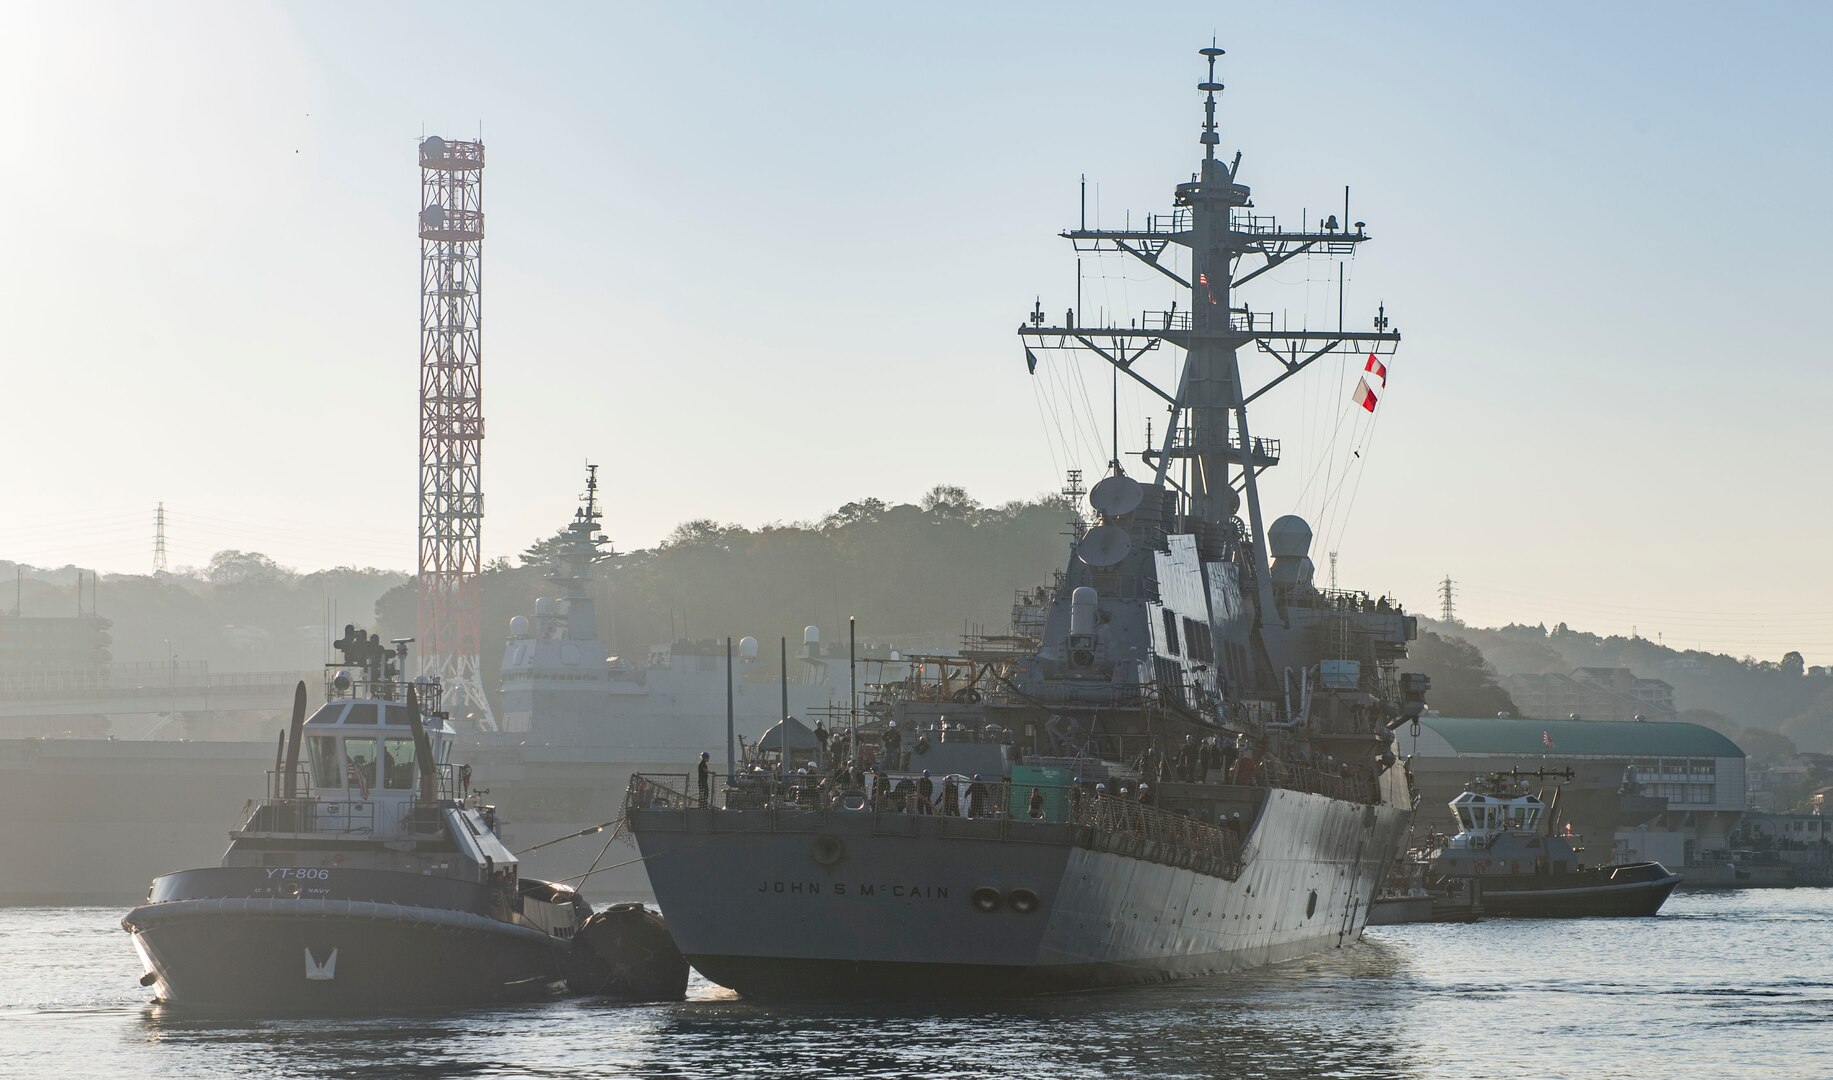 YOKOSUKA, Japan (Nov. 27, 2018) The Arleigh Burke-class guided missile destroyer USS John S. McCain (DDG 56) is pulled towards a pier after departing from a dry dock at Fleet Activities Yokosuka. McCain is departing the dock after an extensive maintenance period in order to sustain the ship's ability to serve as a forward-deployed asset in the U.S. 7th Fleet area of operations.